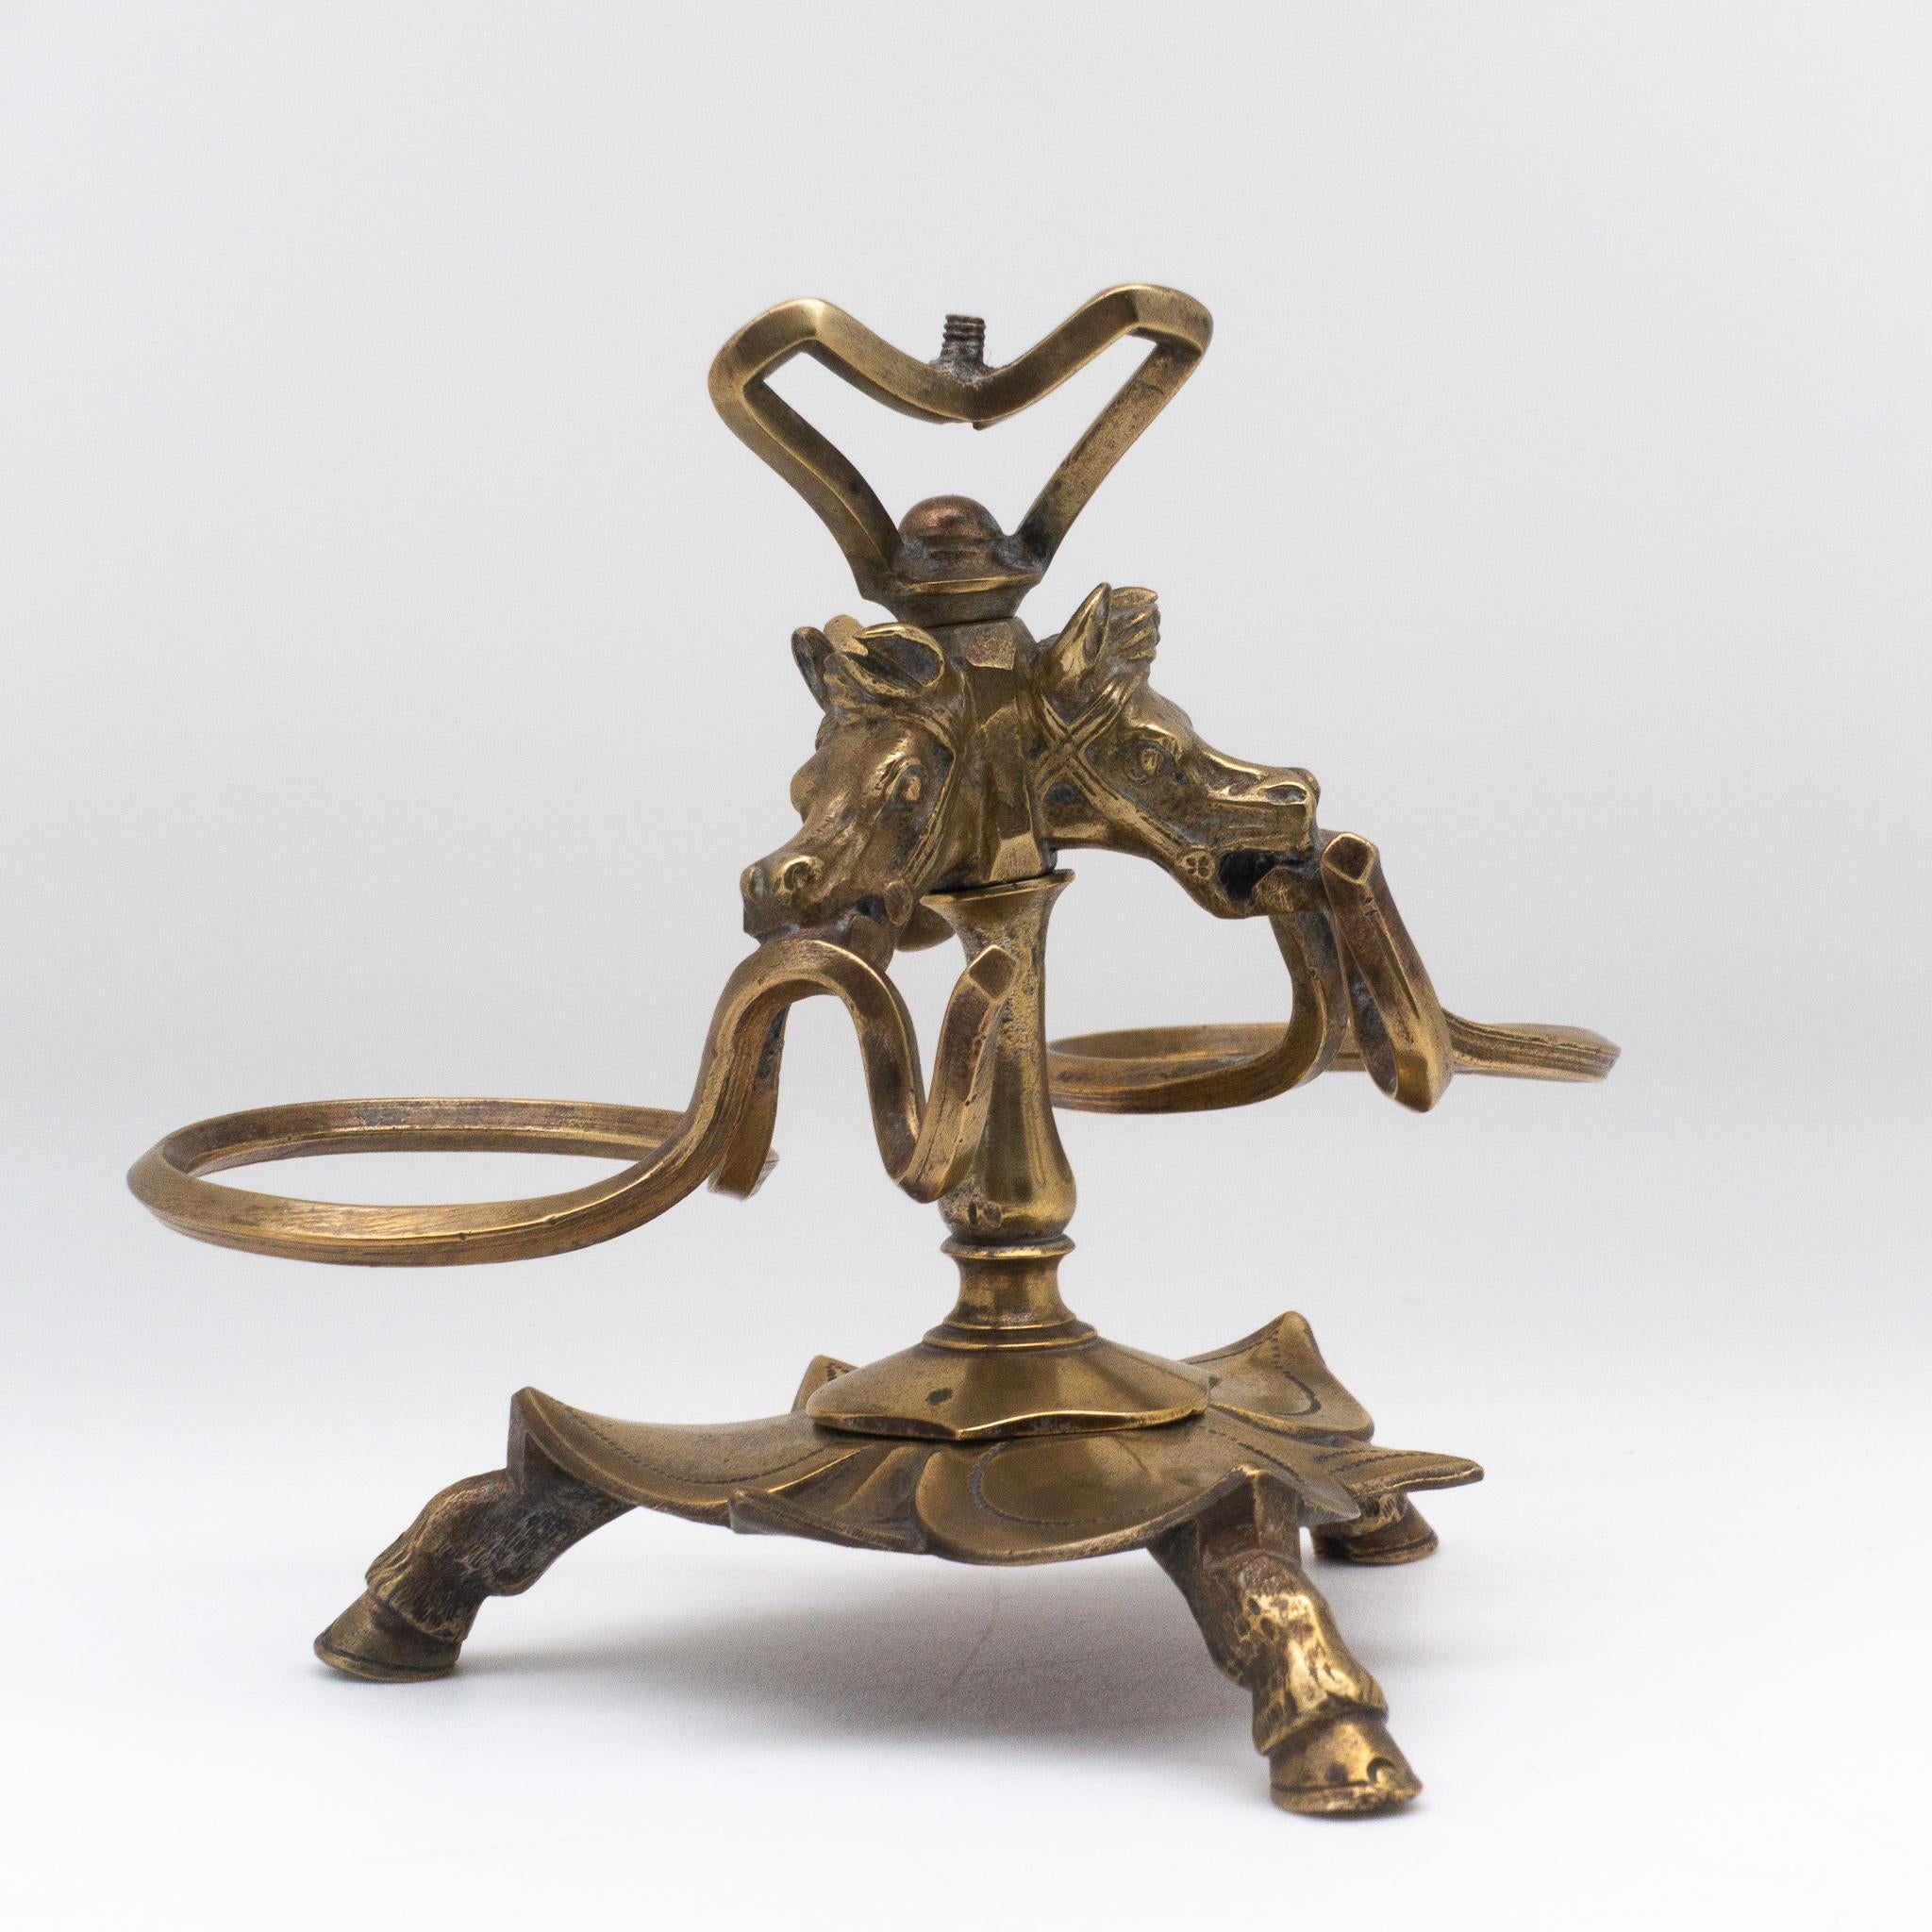 Brass horse inkwell with hoofed feet.